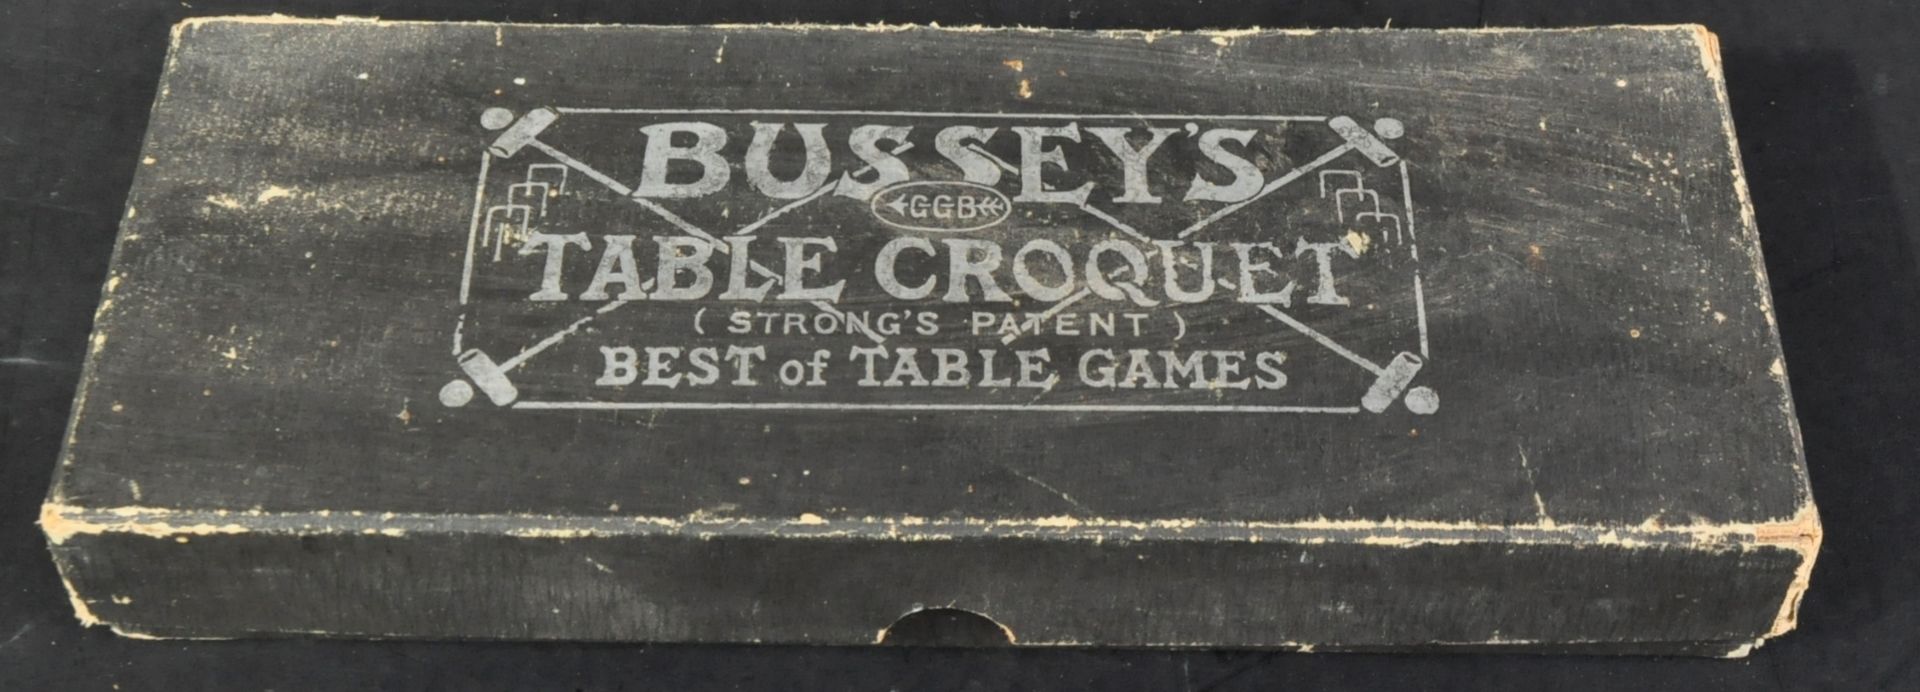 LATE 19TH CENTURY VICTORIAN BUSSEYS TABLE CROQUET - Image 4 of 4